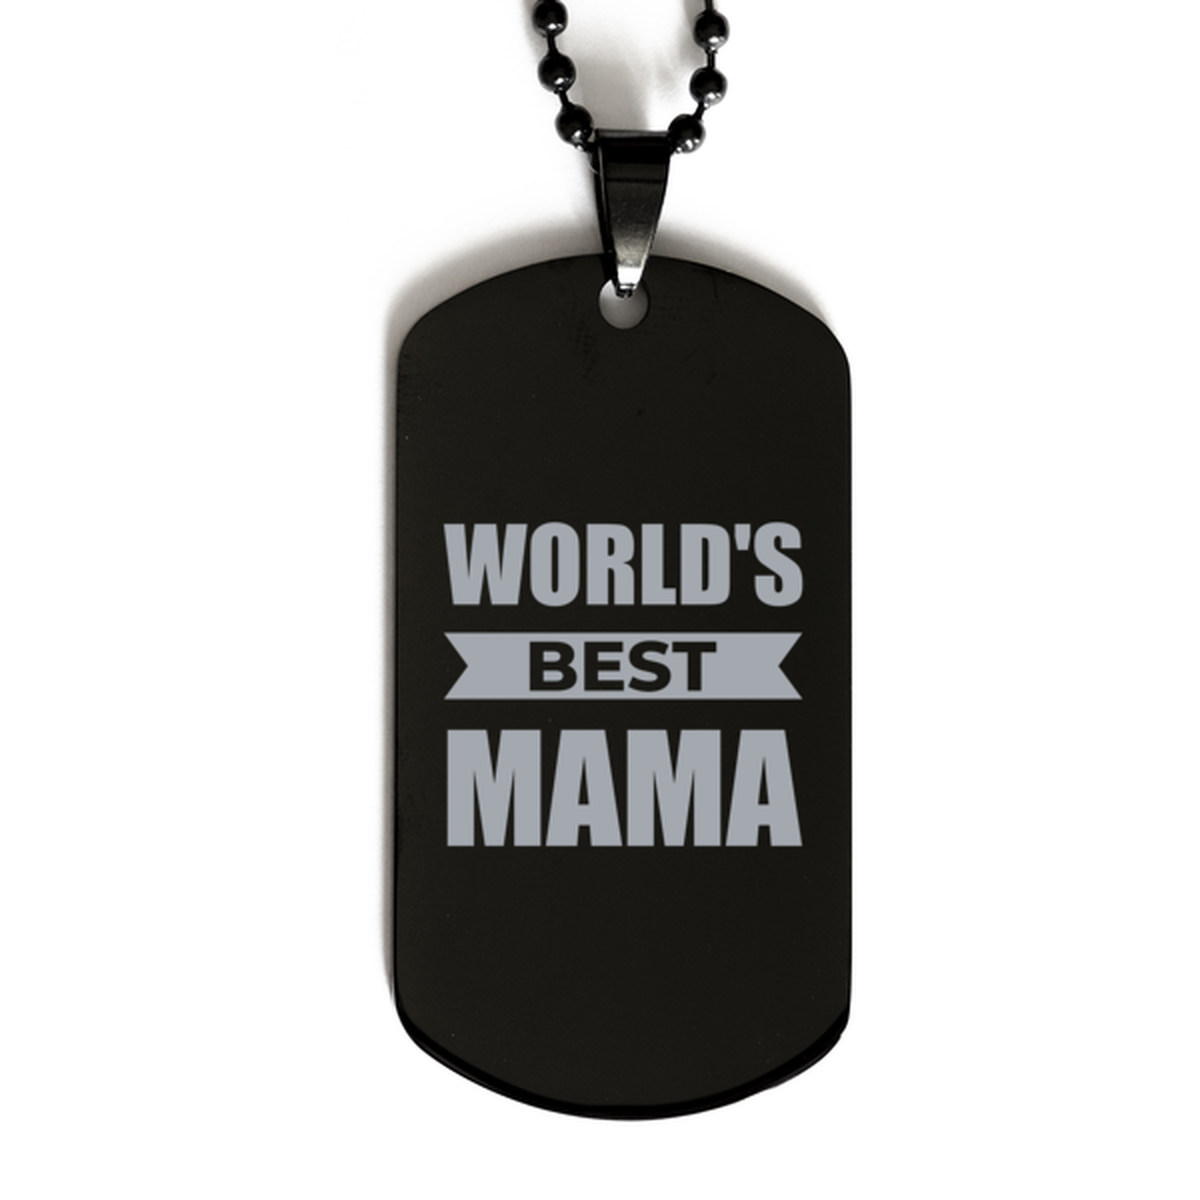 Worlds Best Mama Gifts, Funny Black Engraved Dog Tag For Mama, Birthday Presents For Women